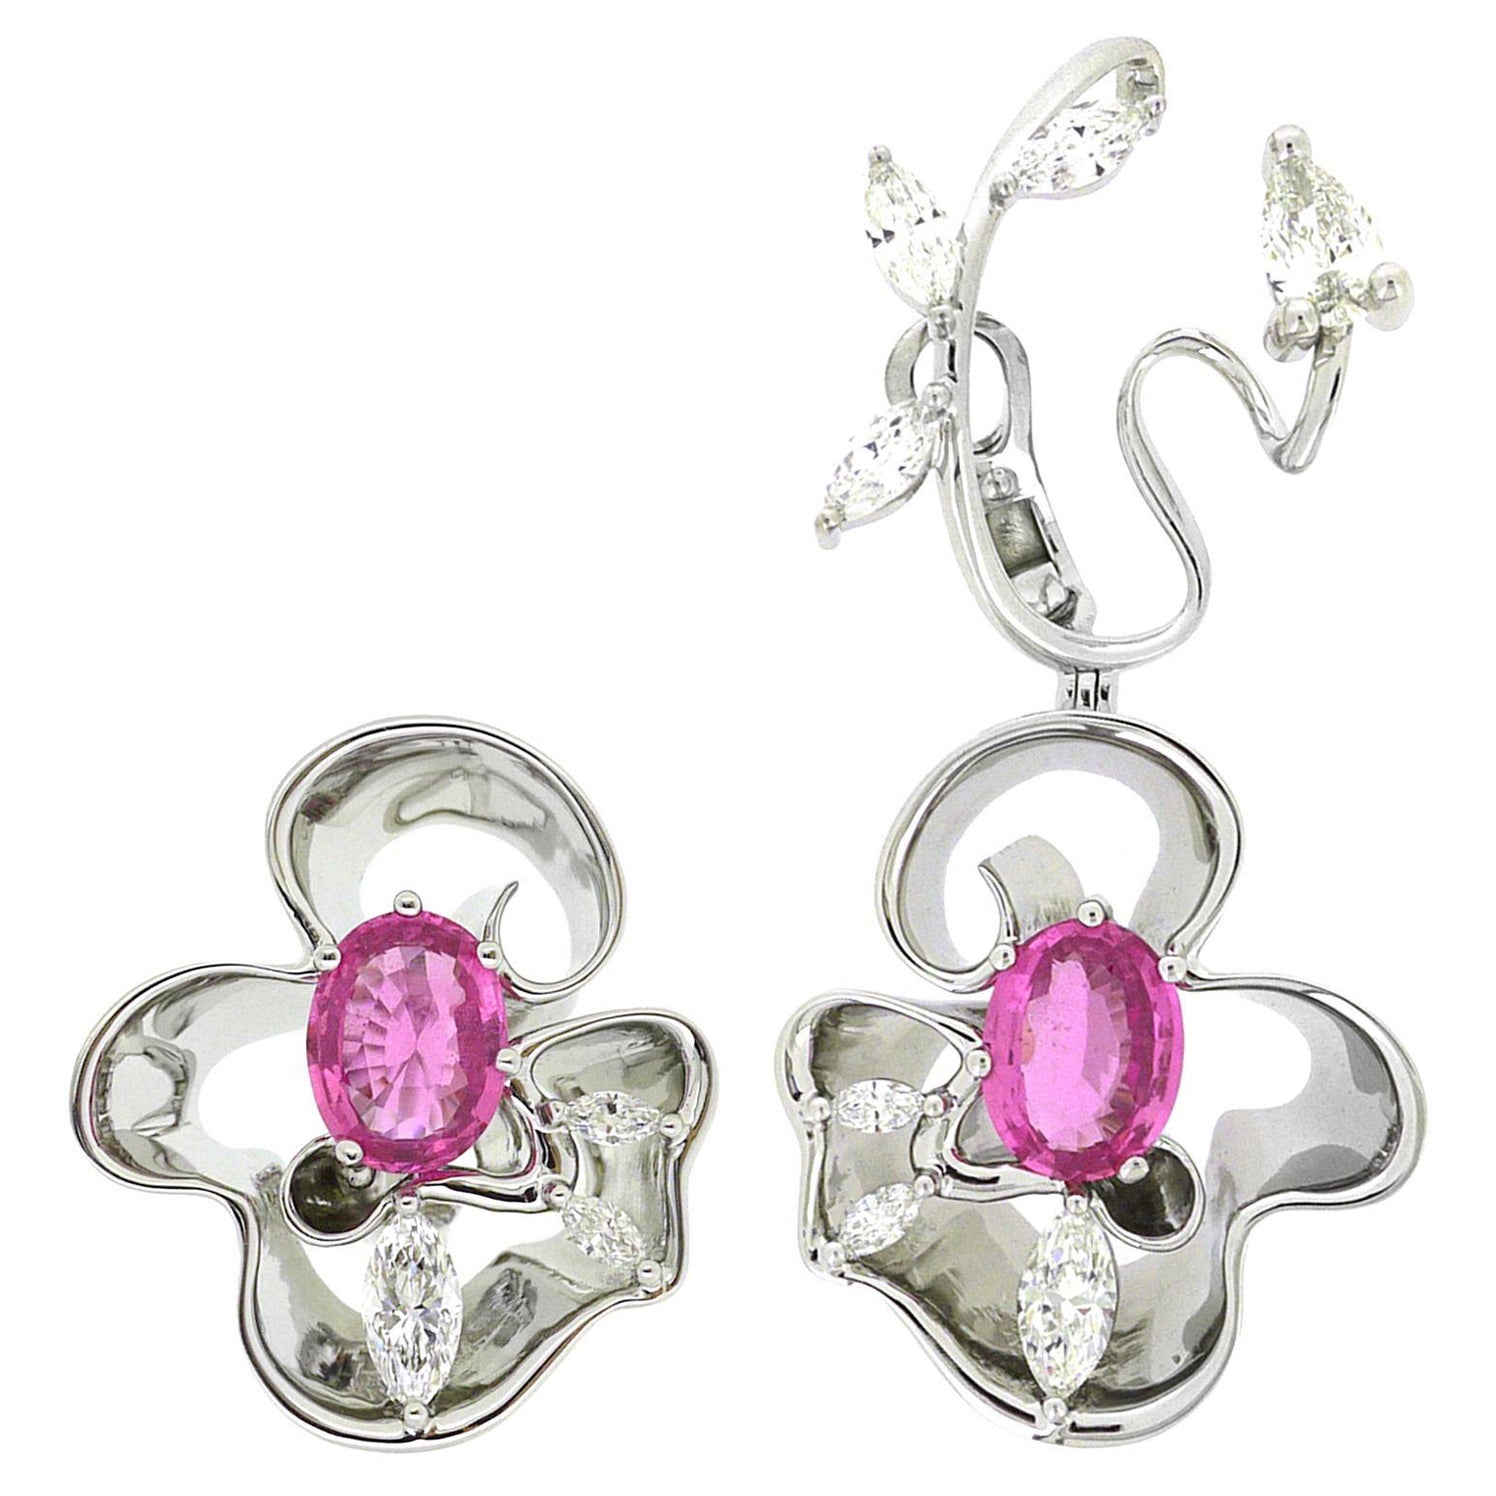 Taif Rose Earrings For Sale